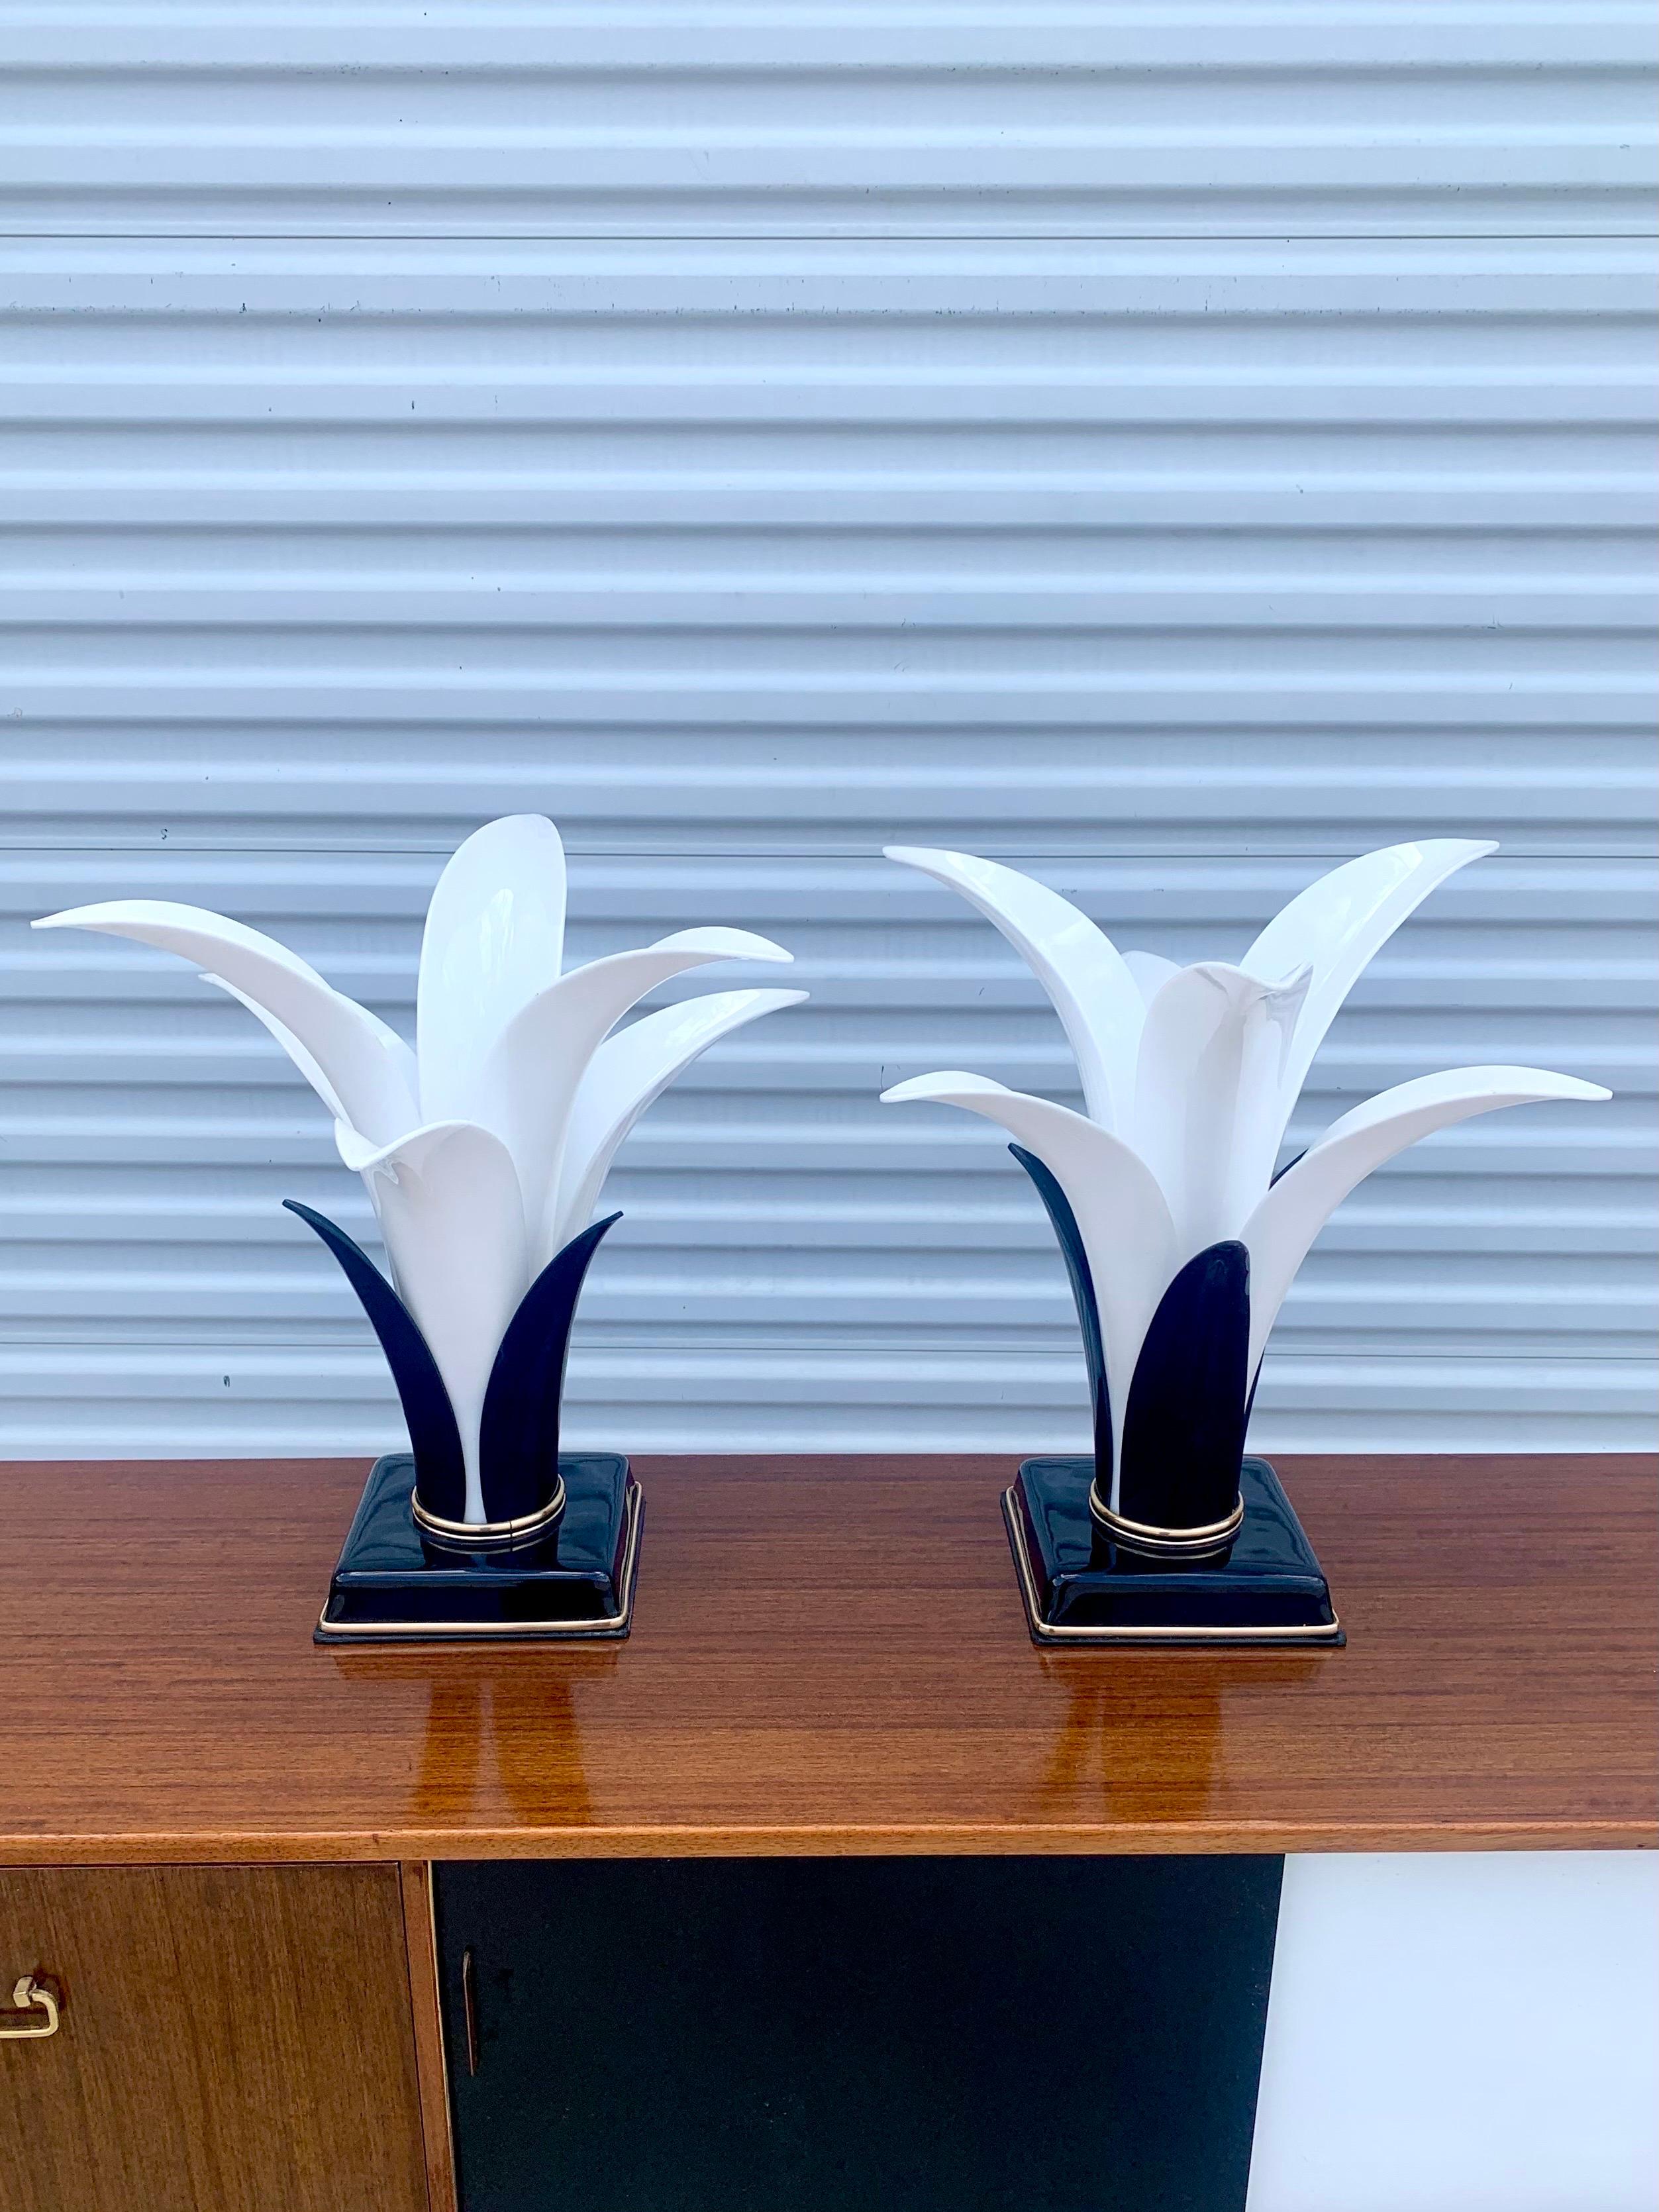 Pair of lamps made by Acrylic Designs in Miami. Beautiful and striking form made from white and black lucite pieces. Very fun and festive lamps begging to lift the spirits of any room. 

Measures: Base of the lamps are 7.5” by 7.5”

The lamps